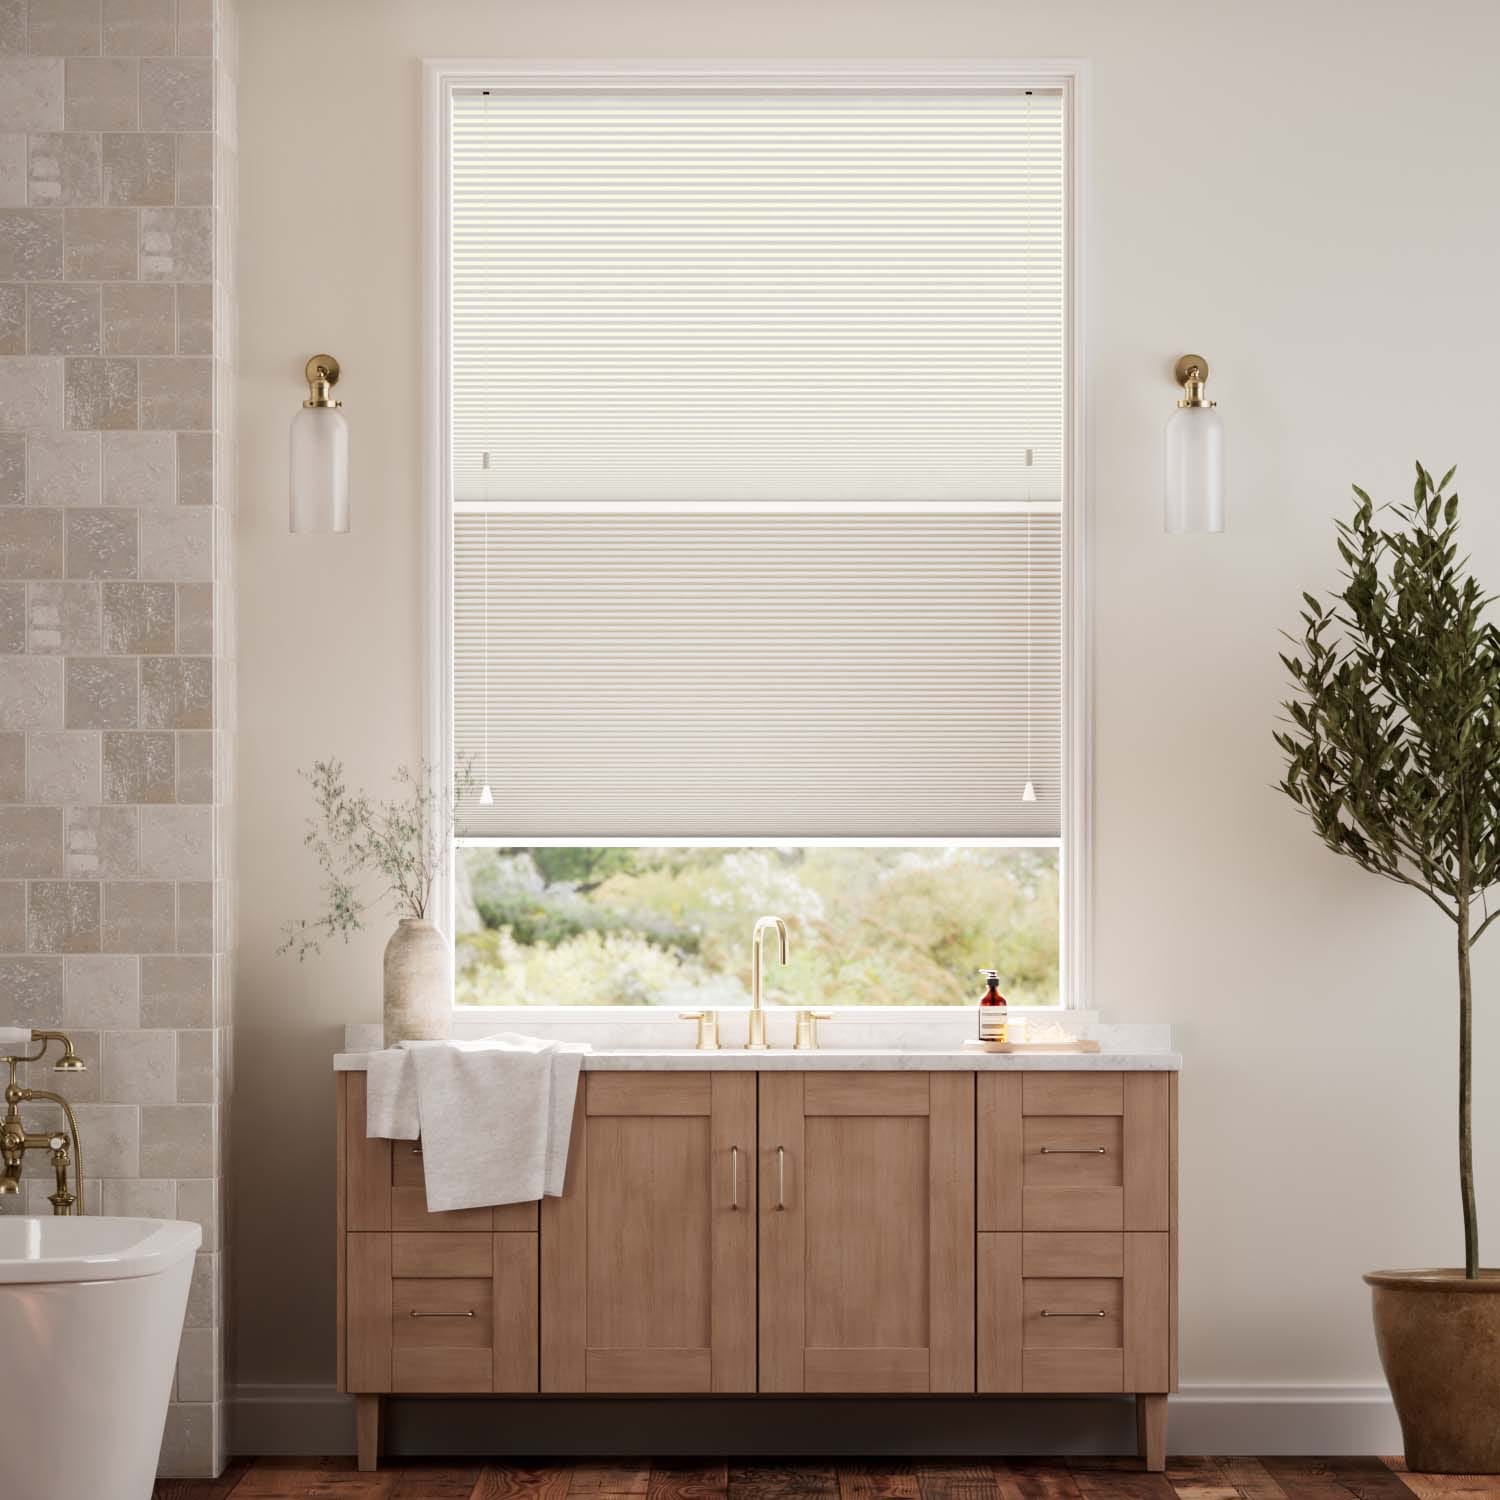 Night & Day Thermal Duo Sandstone Pleated Blind